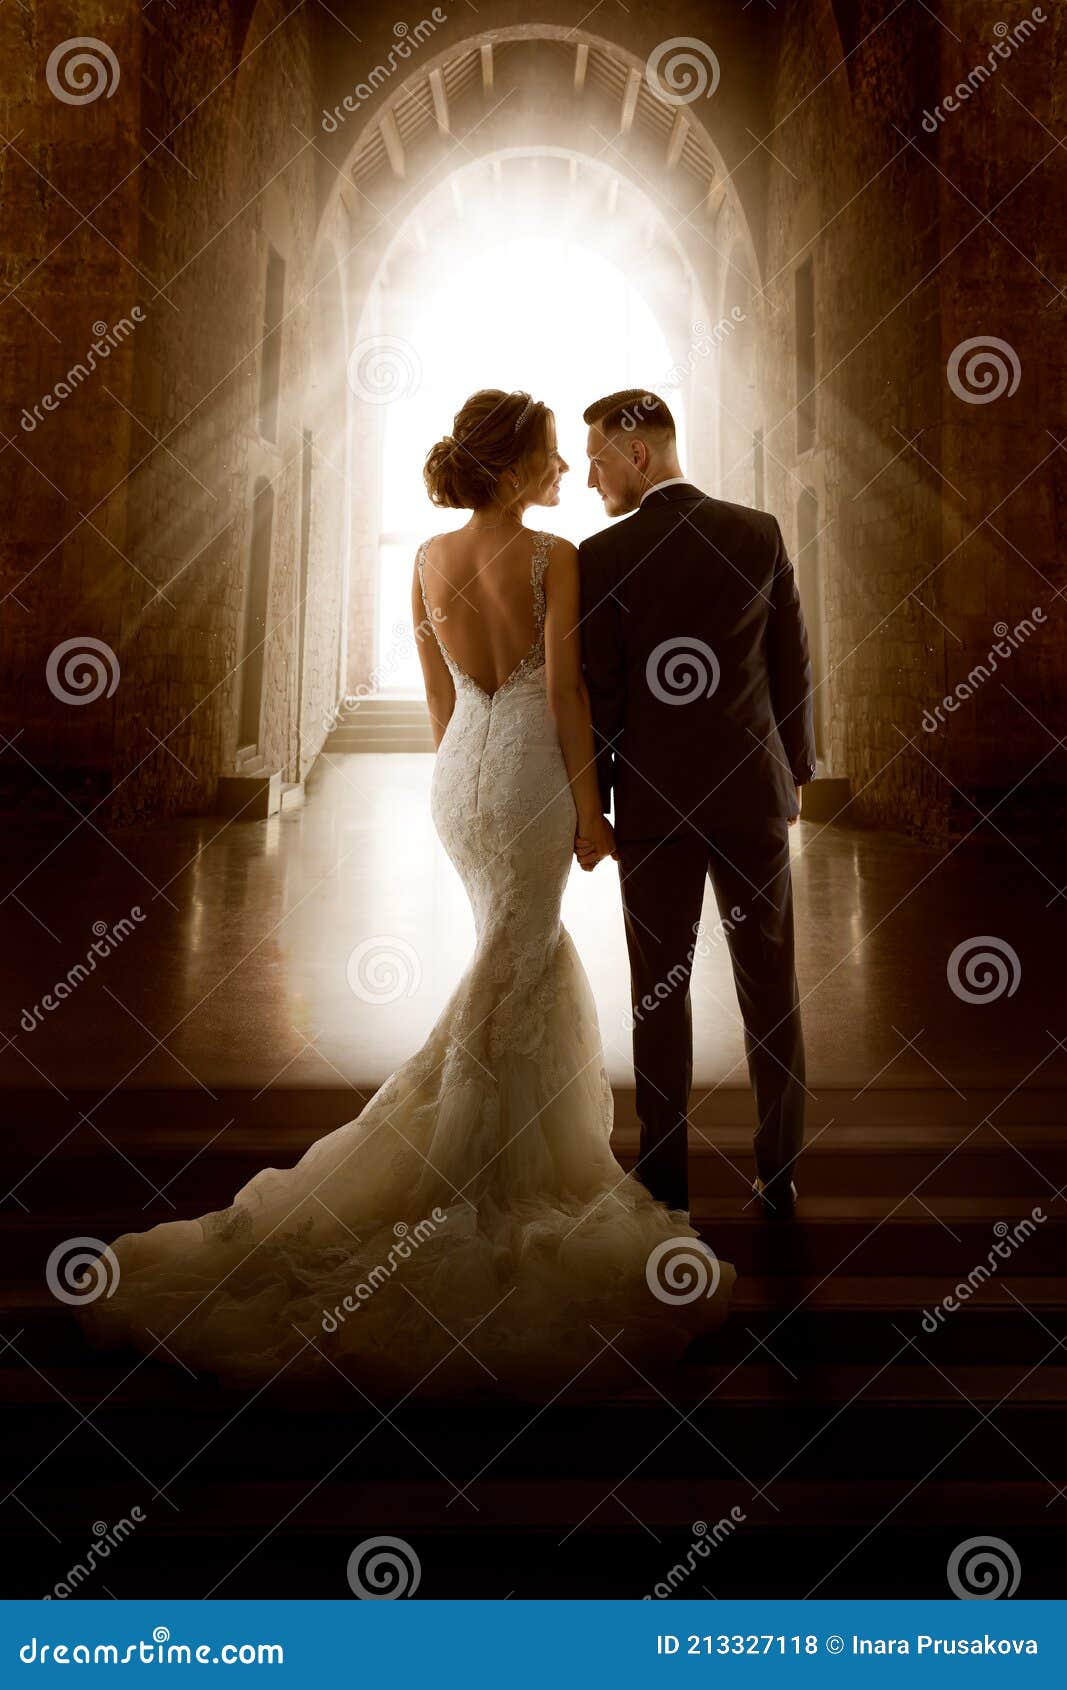 wedding couple in love back view walking down aisle church. newly wedded bride groom. wedding day ceremony